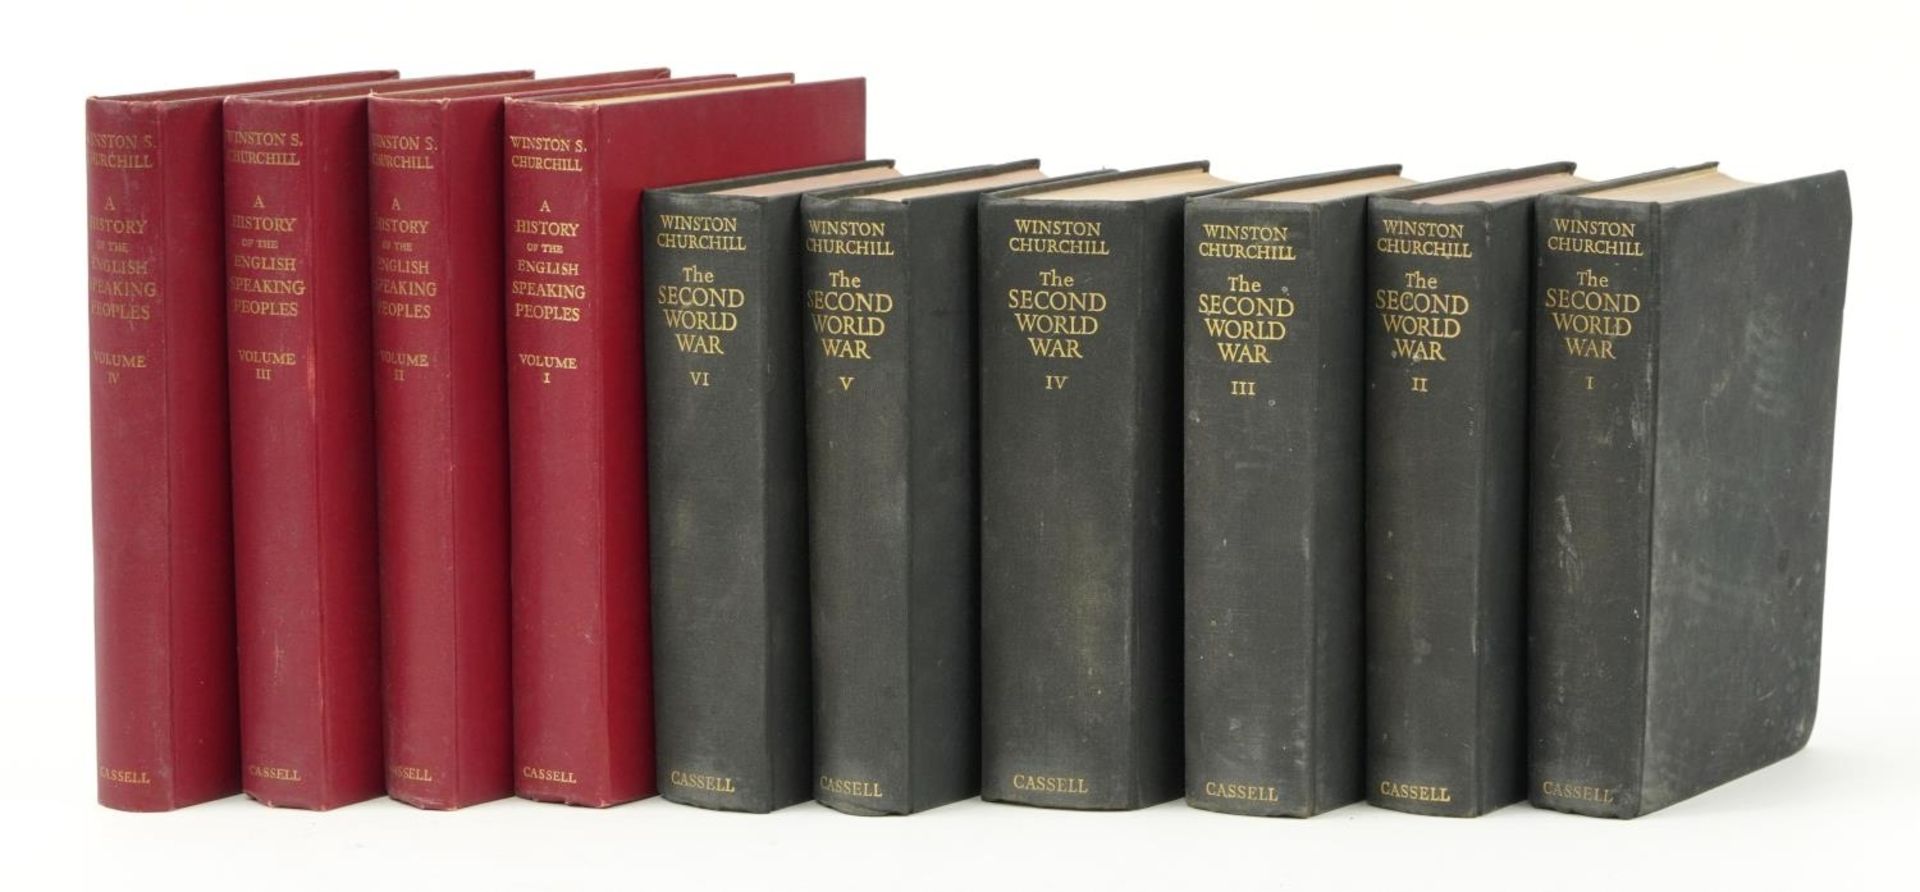 Winston Churchill hardback books comprising The Second World War, volumes 1-6 and A History of the